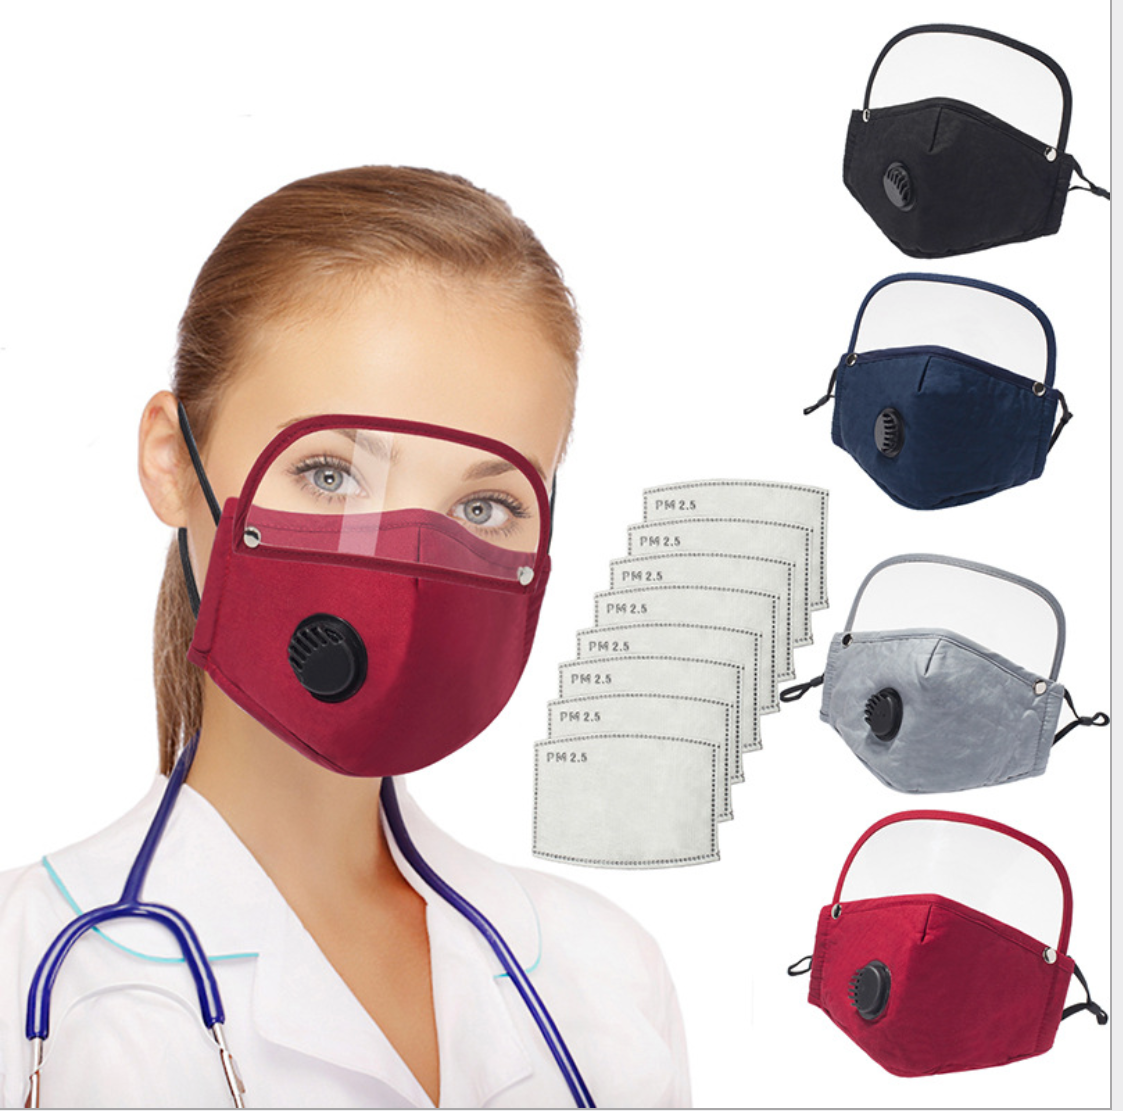 Detachable Protective Face Face Shield Protective Masking Cotton Masking With Breathing Valve:black, Red, Dark Blue, Grey